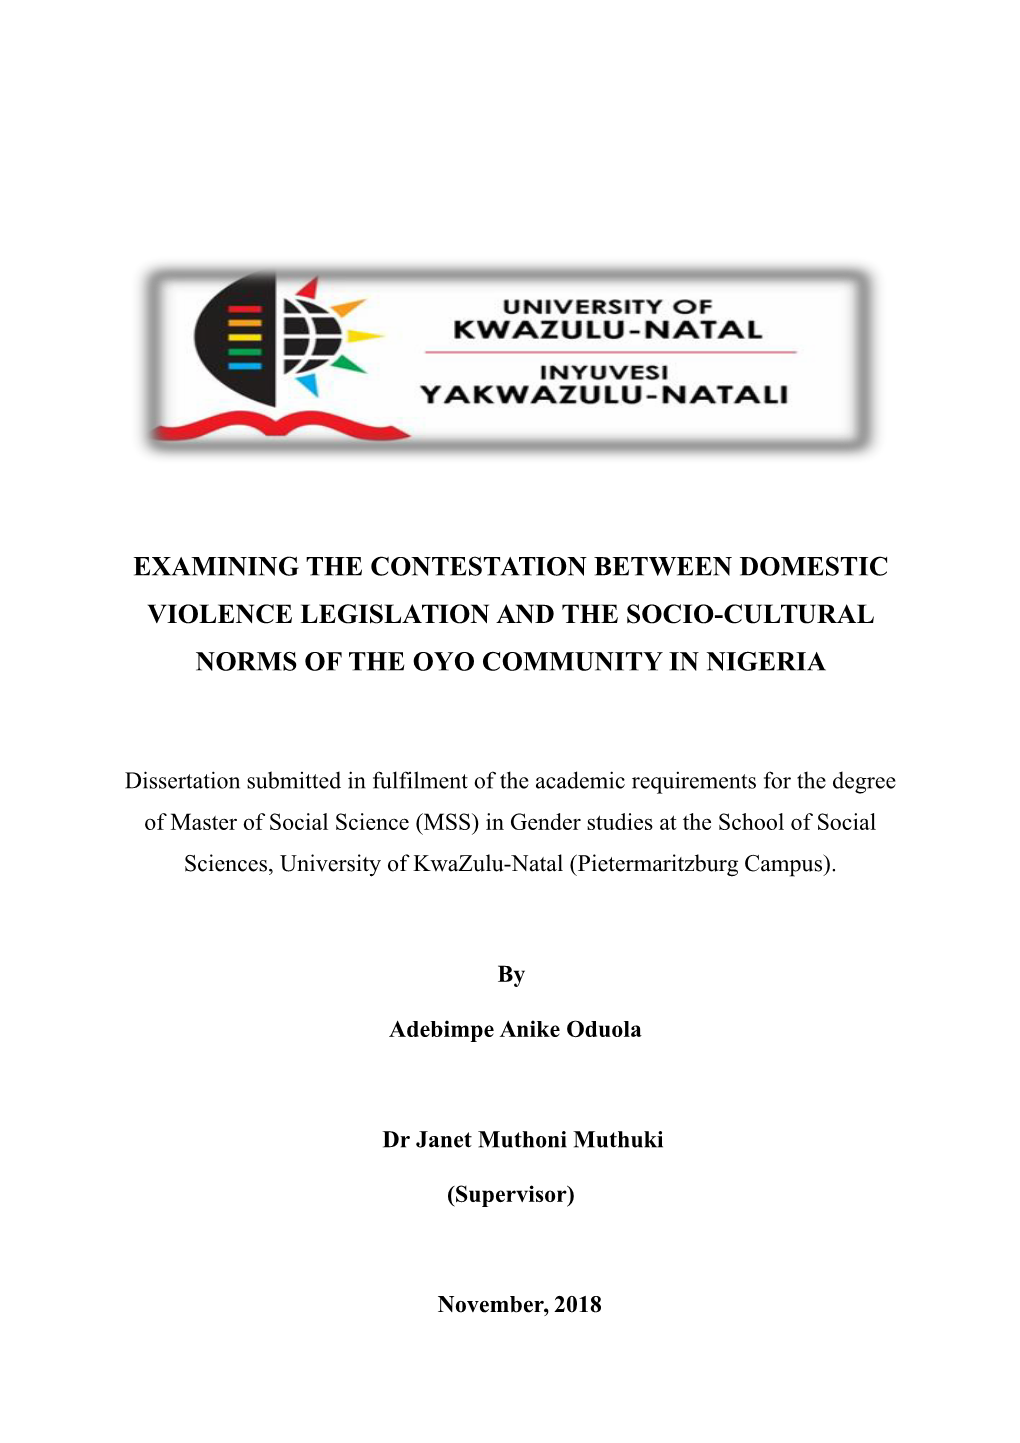 Examining the Contestation Between Domestic Violence Legislation and the Socio-Cultural Norms of the Oyo Community in Nigeria